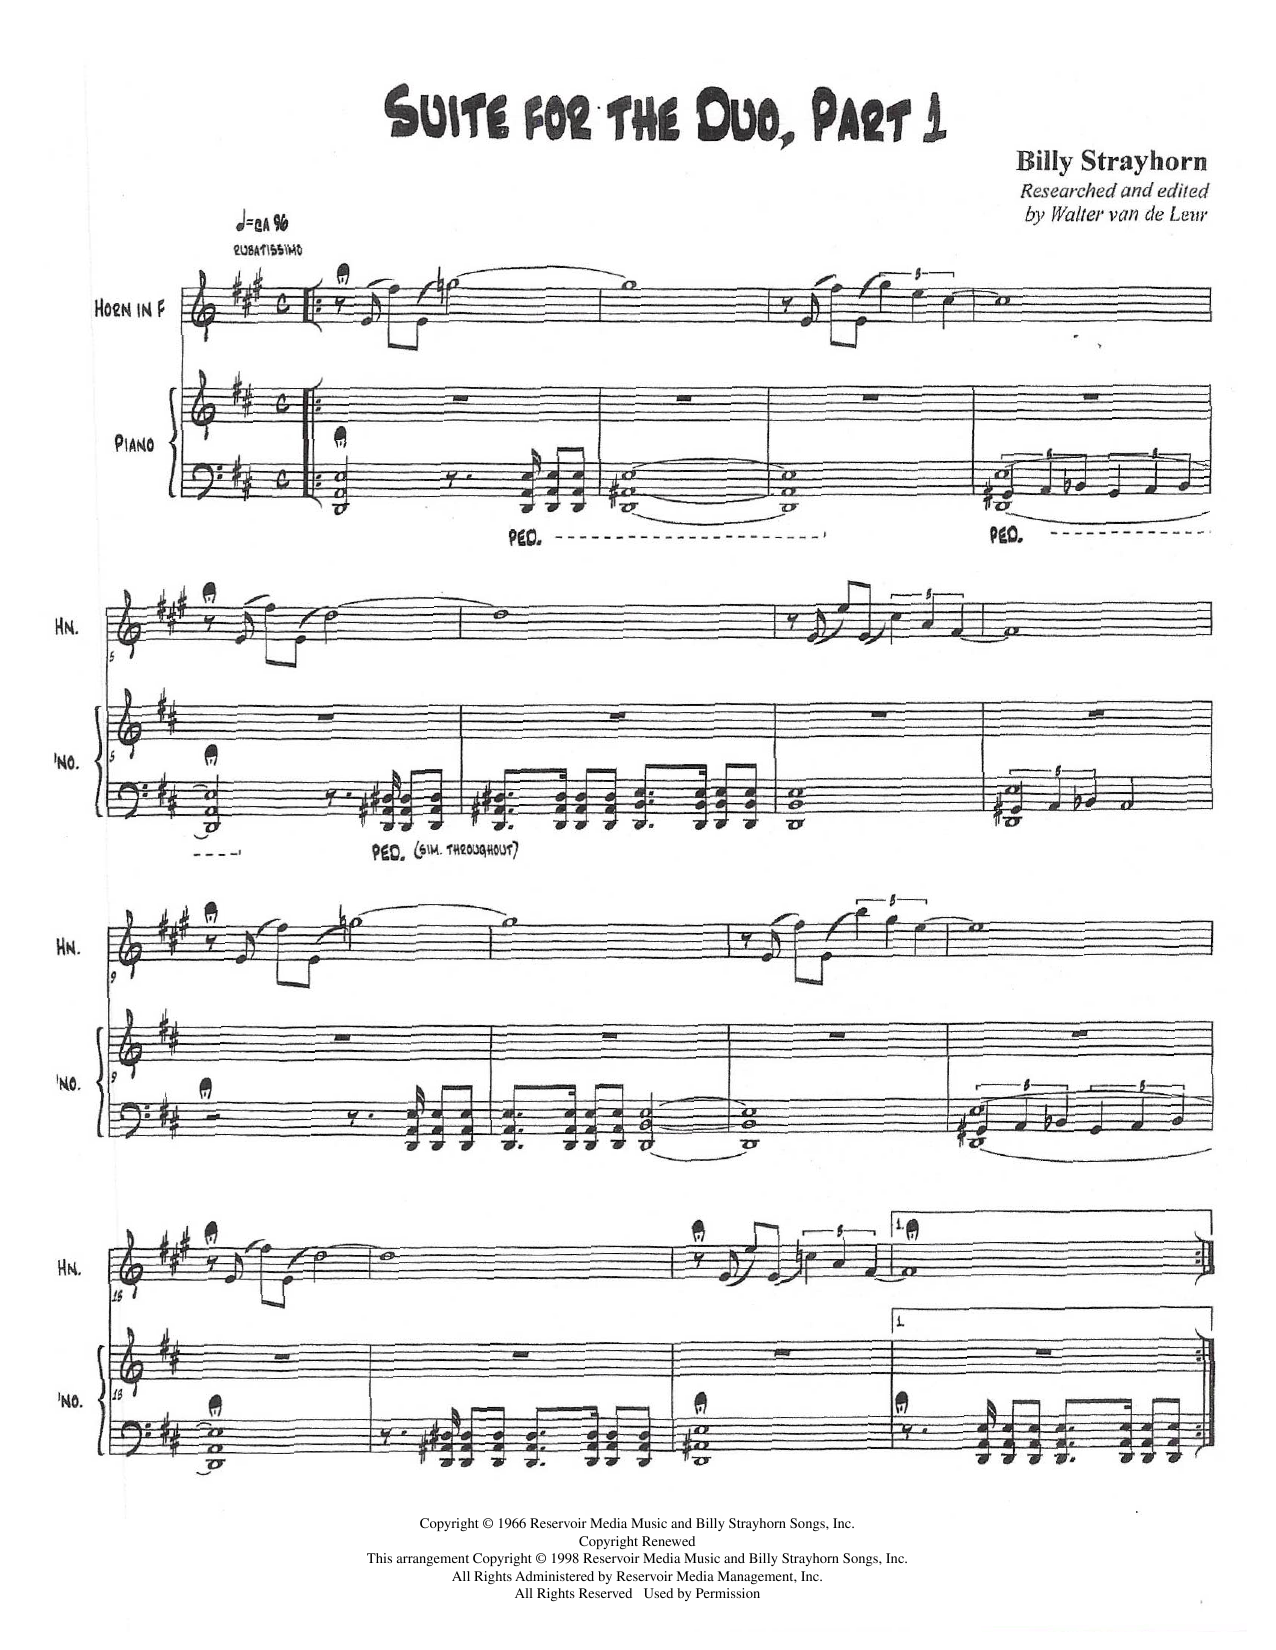 Download Billy Strayhorn Suite For The Duo (Parts 1-3) Sheet Music